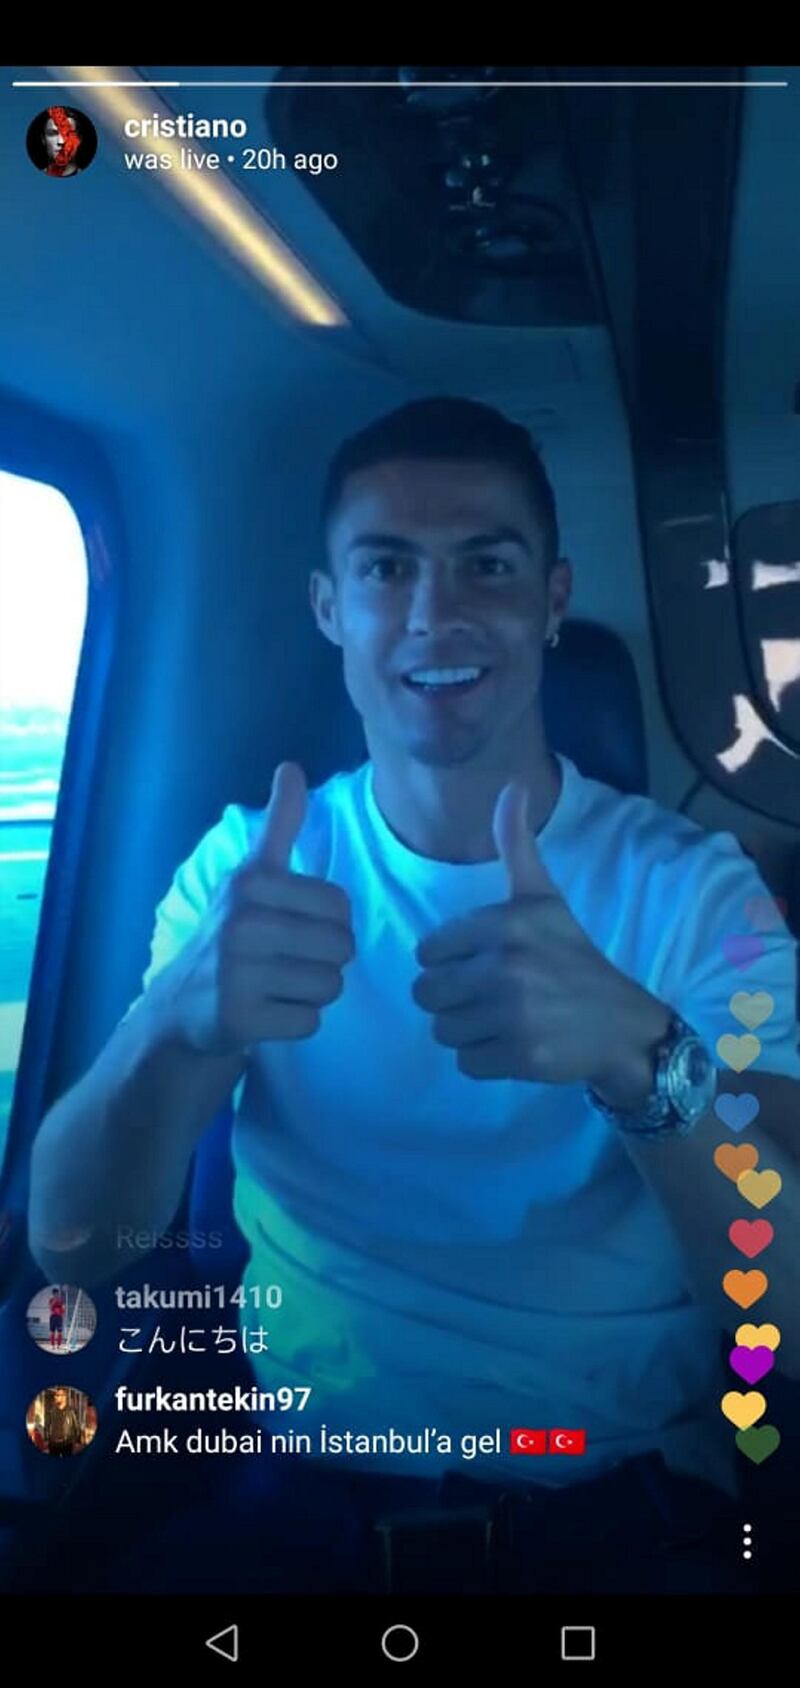 Ronaldo is all smiles on board the helicopter. Courtesy cristiano / Instagram